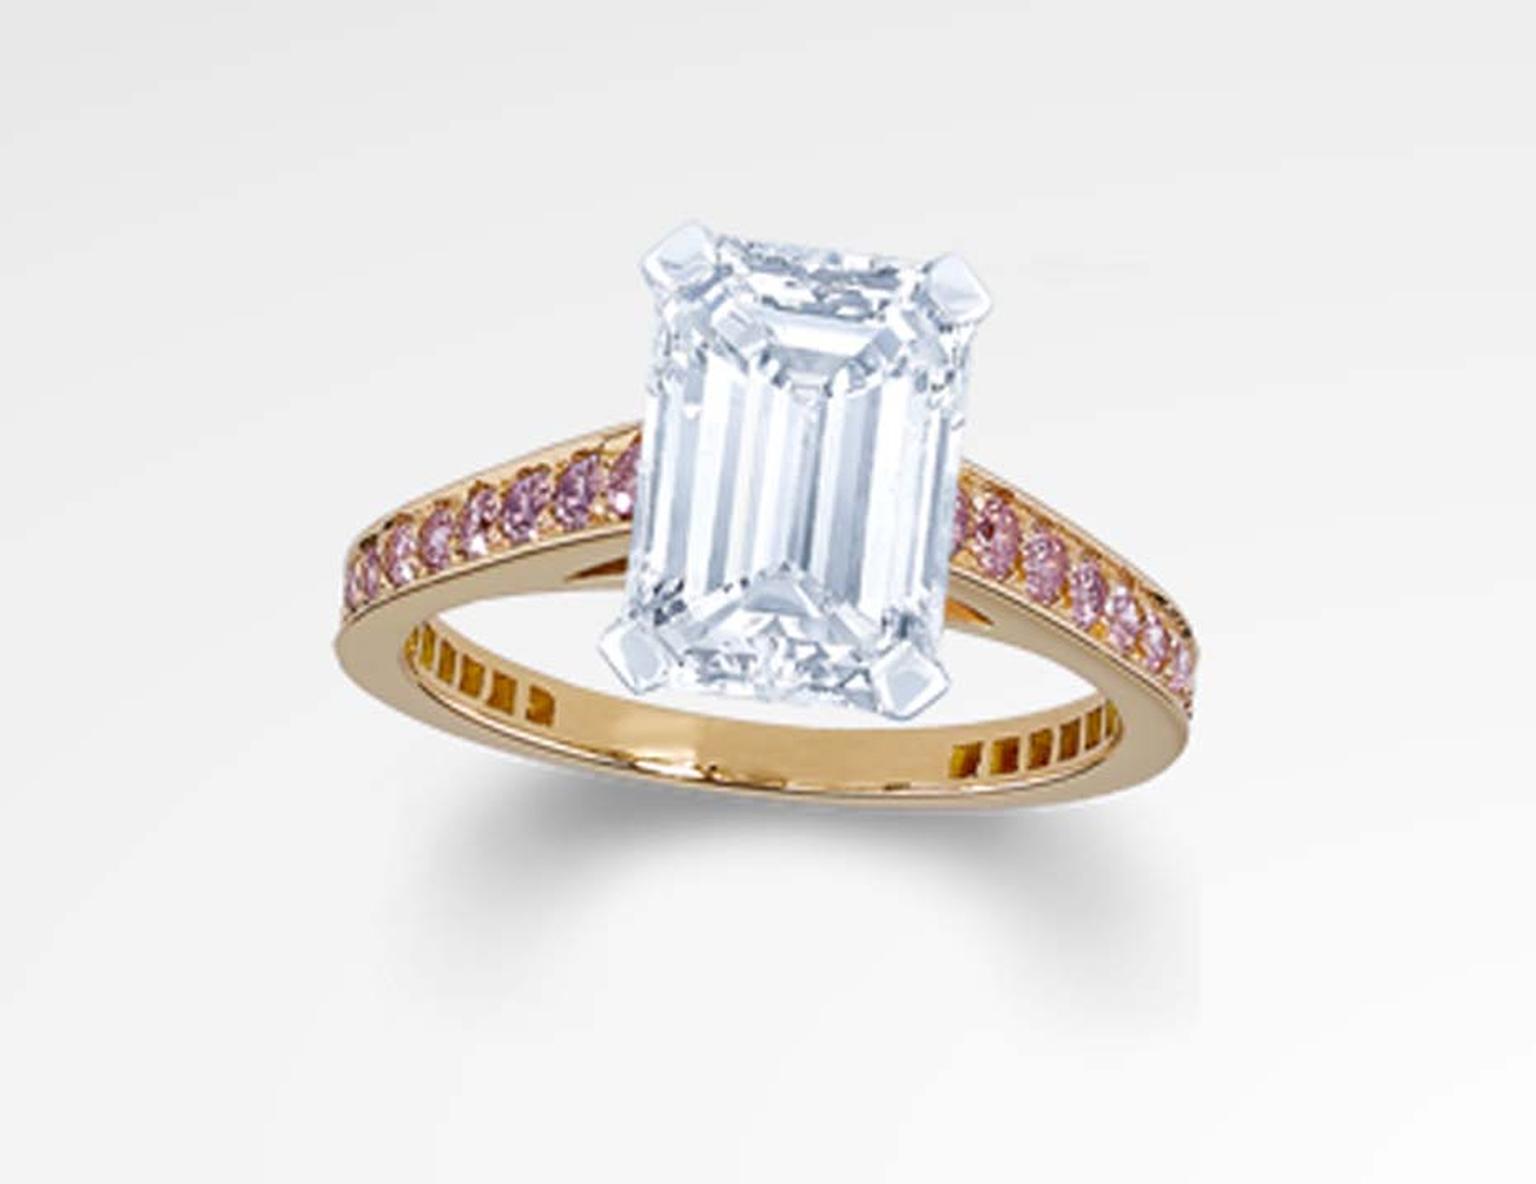 Graff emerald cut engagement ring featuring a rose gold band set with pink pave diamonds.